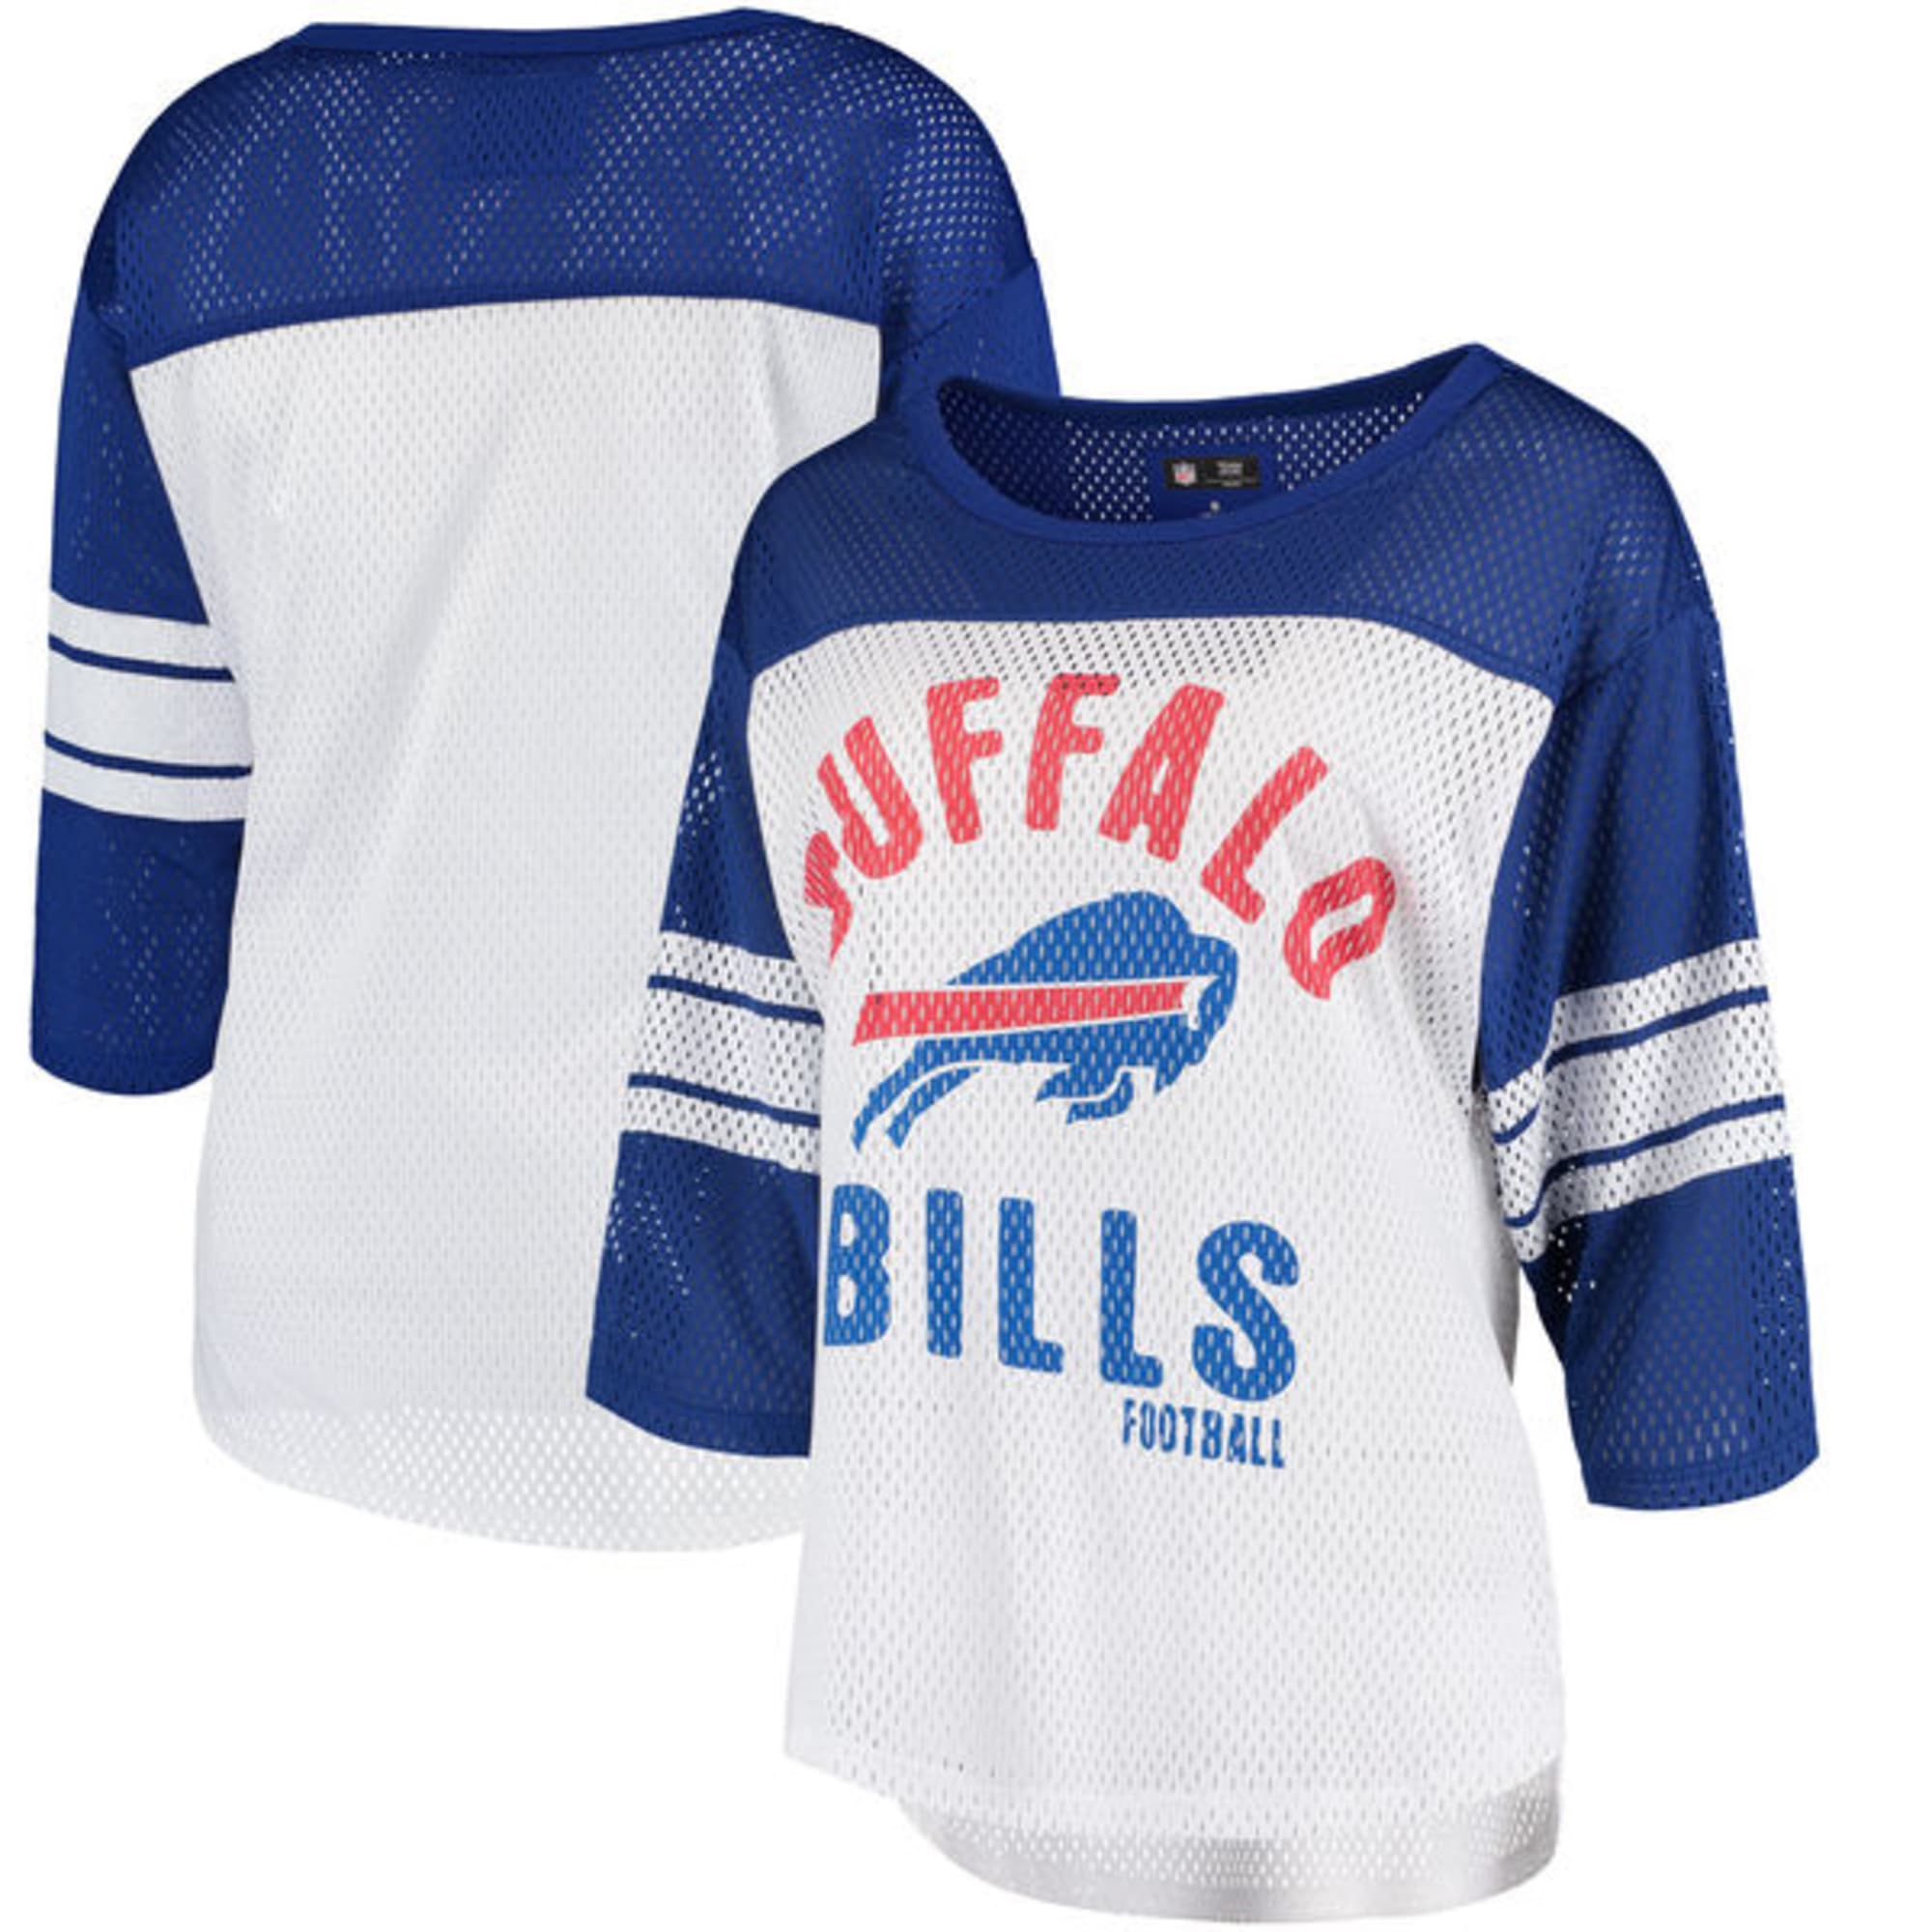 Buffalo Bills Gift Guide For Women: 10 must-have gifts